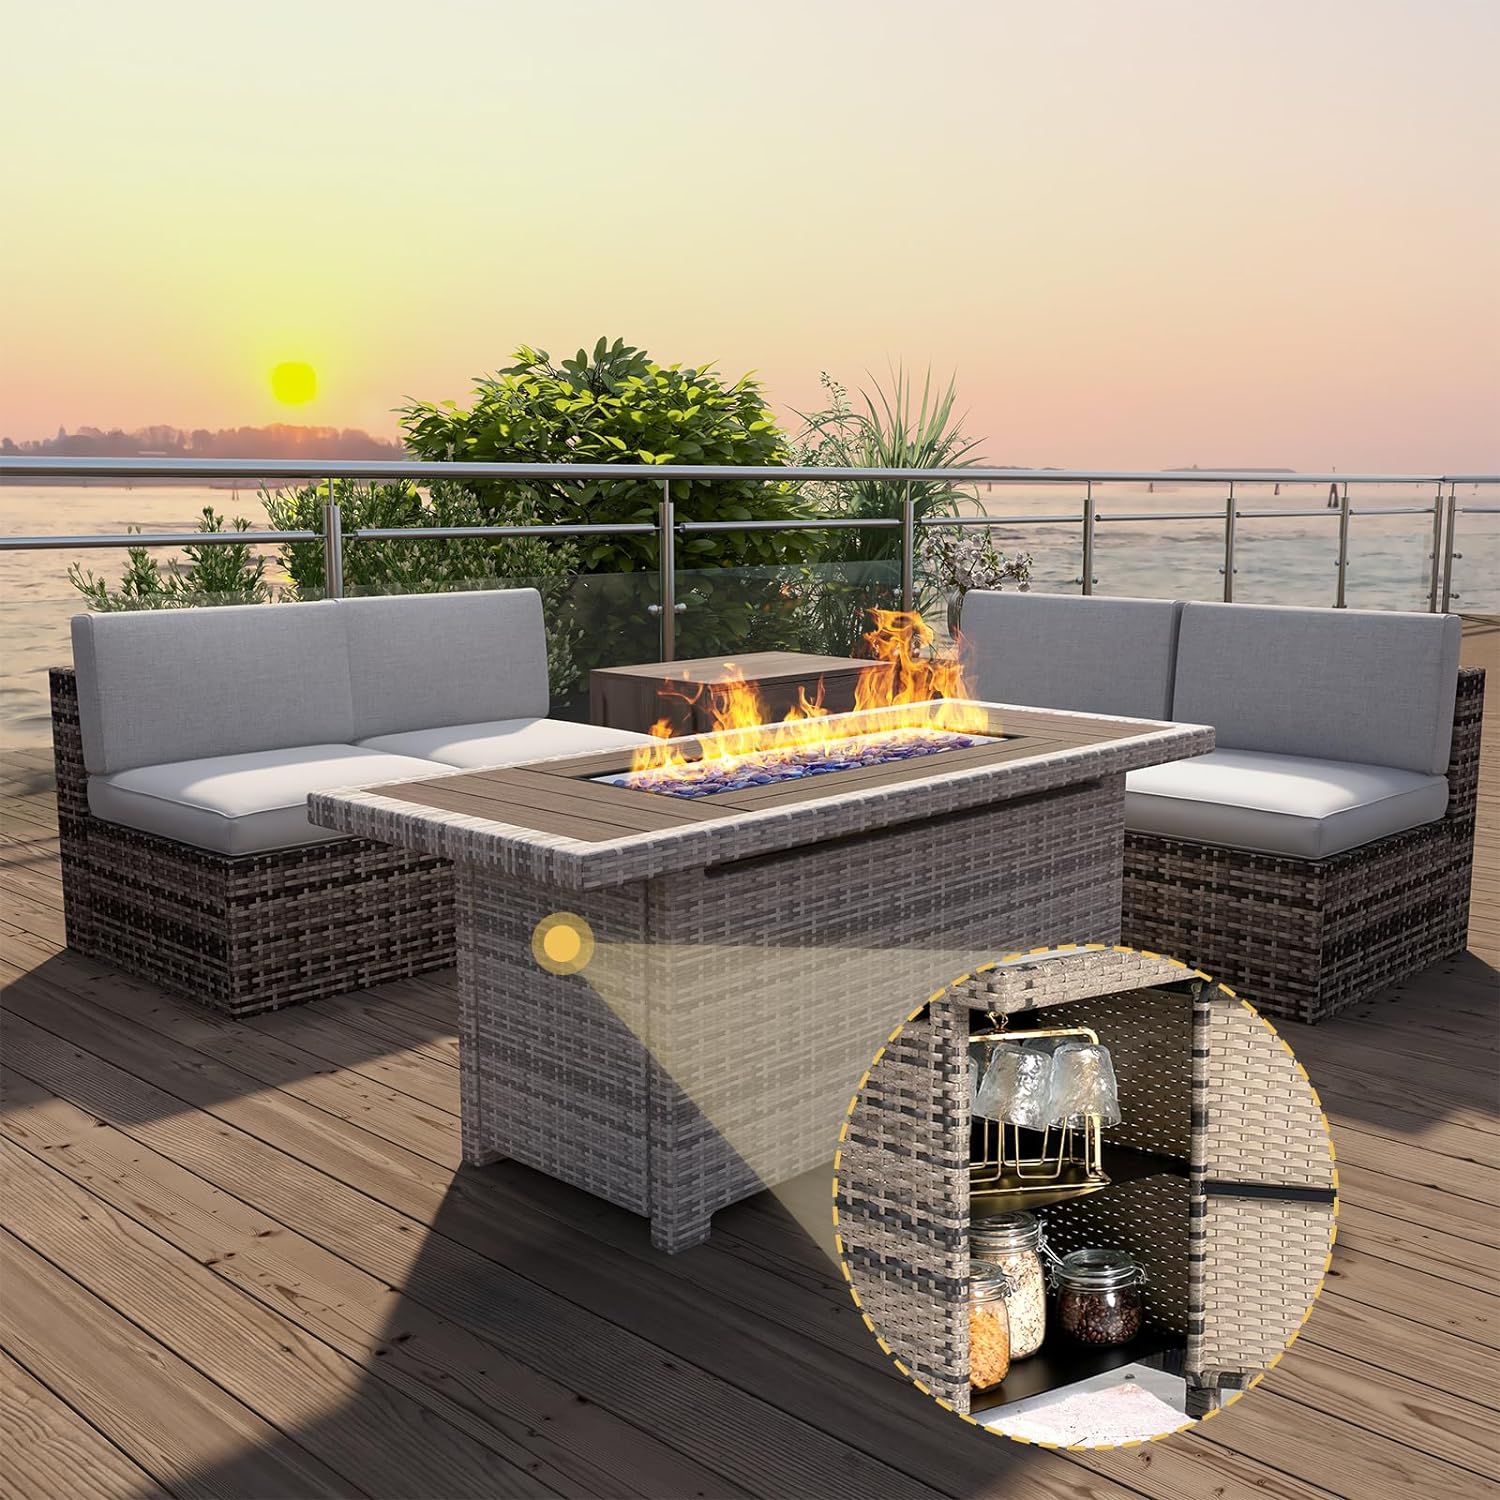 40 in CSA Propane 50,000 BTU Auto Ignition Gas Fire Pit with Oxford Cover, Grey Wicker